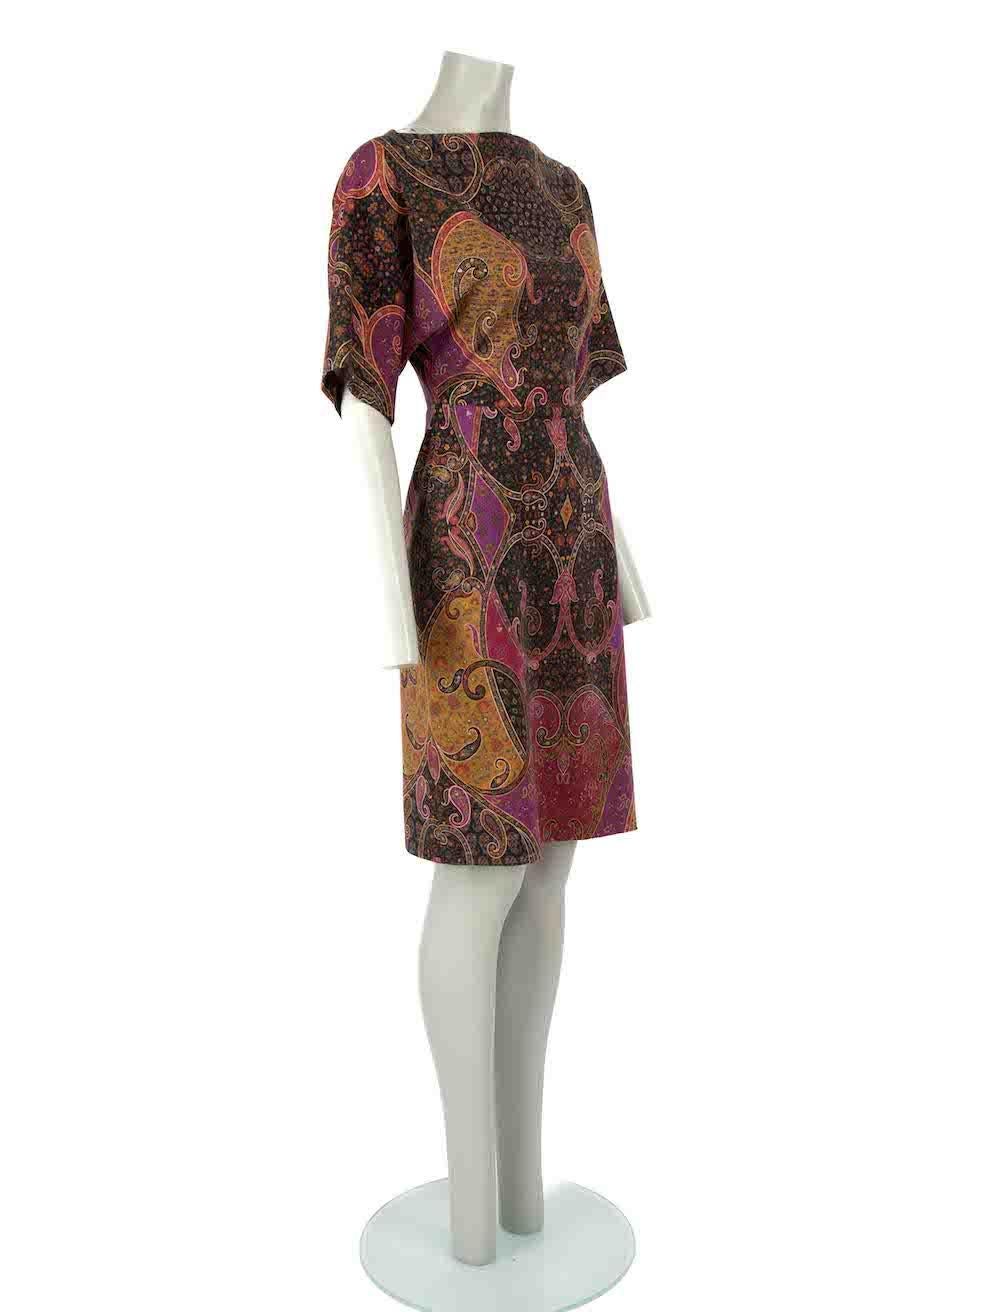 CONDITION is Very good. Hardly any visible wear to dress is evident on this used Etro designer resale item.
 
 Details
 Multicolour
 Viscose
 Dress
 Patterned
 Knee length
 Short sleeves
 Square neck
 Side zip fastening
 
 
 Made in Italy
 
